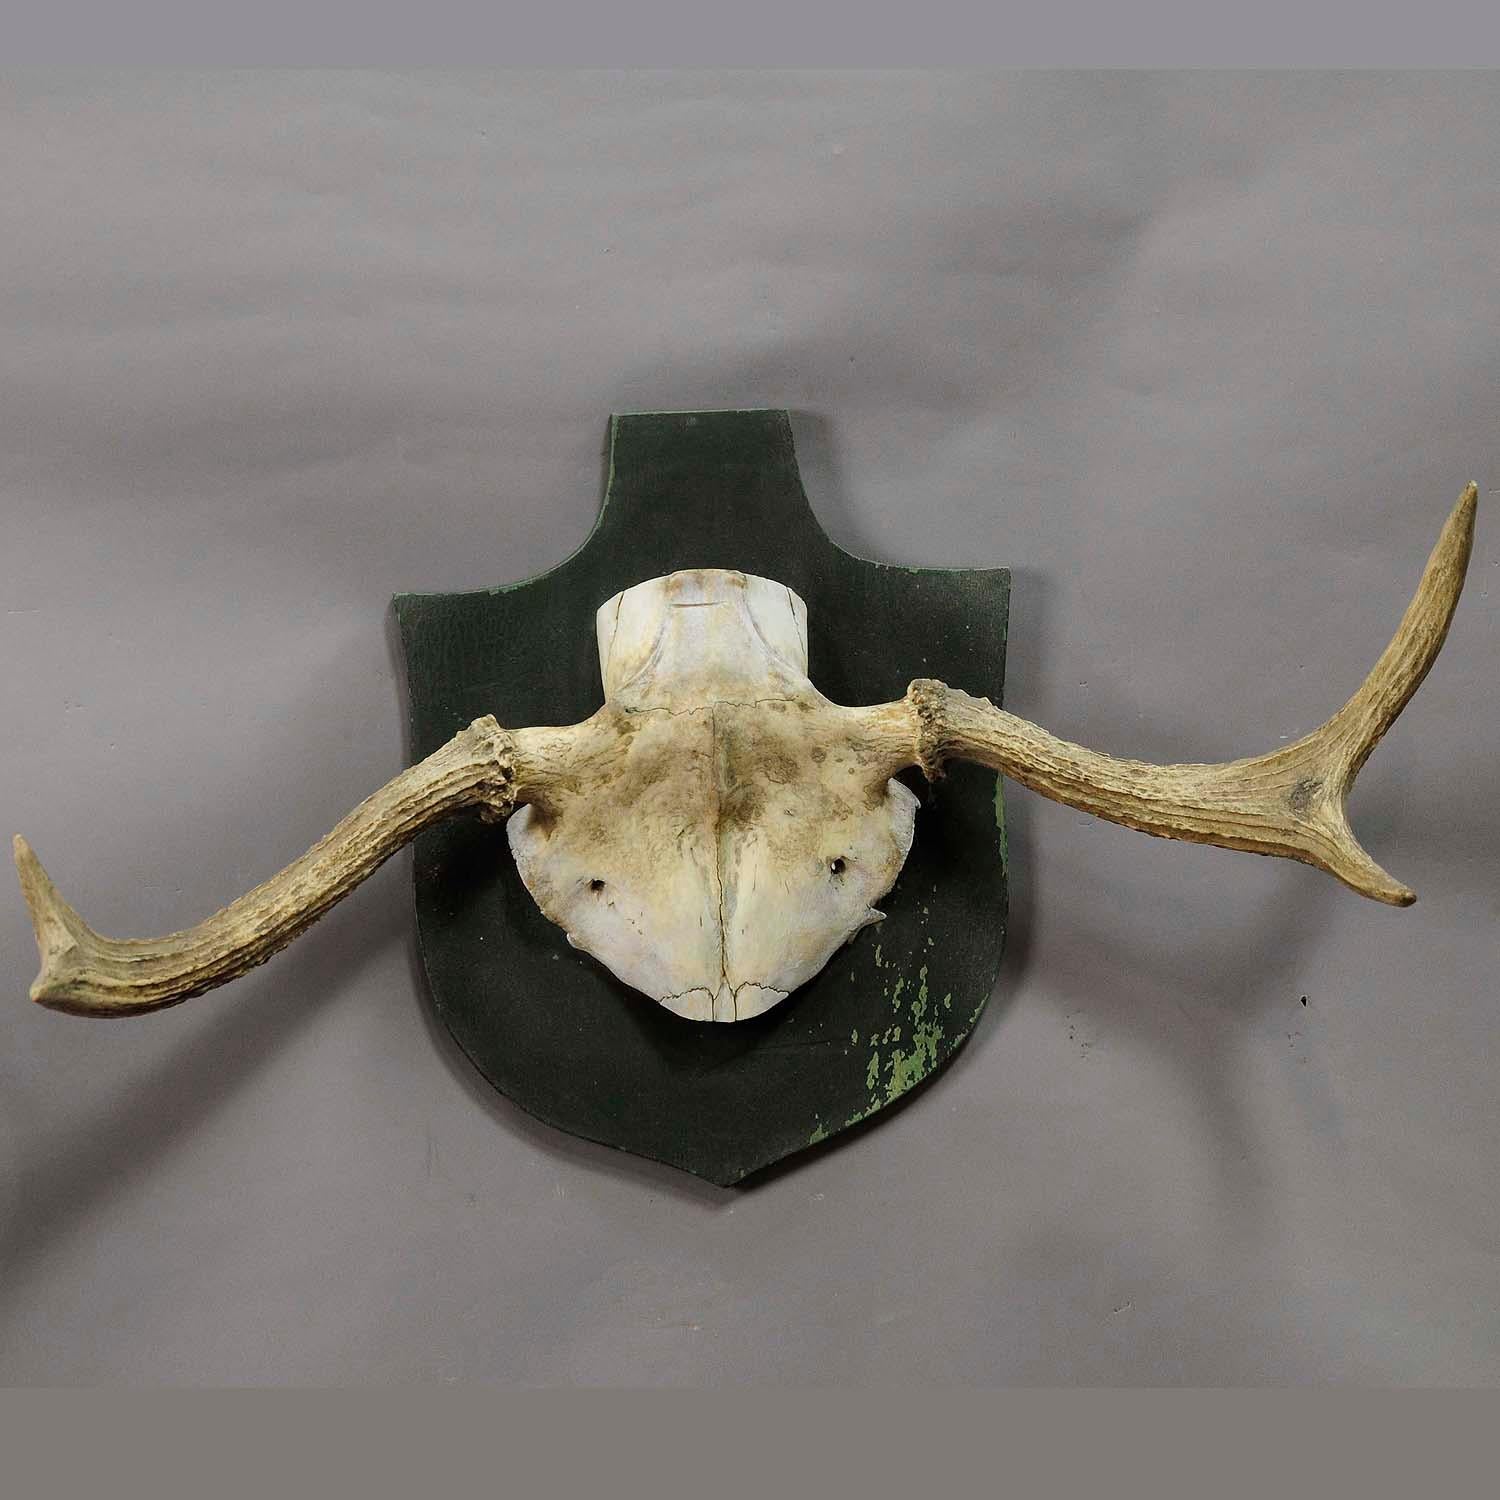 Particular Trophy of an Abnorme Moose from a Noble Estate, circa 1930s

A particular trophy of an abnorme moose (Alces alces) from the palace of Salem in South Germany. It was shot by a member of the lordly family of Baden ca. 1930s, mounted on a